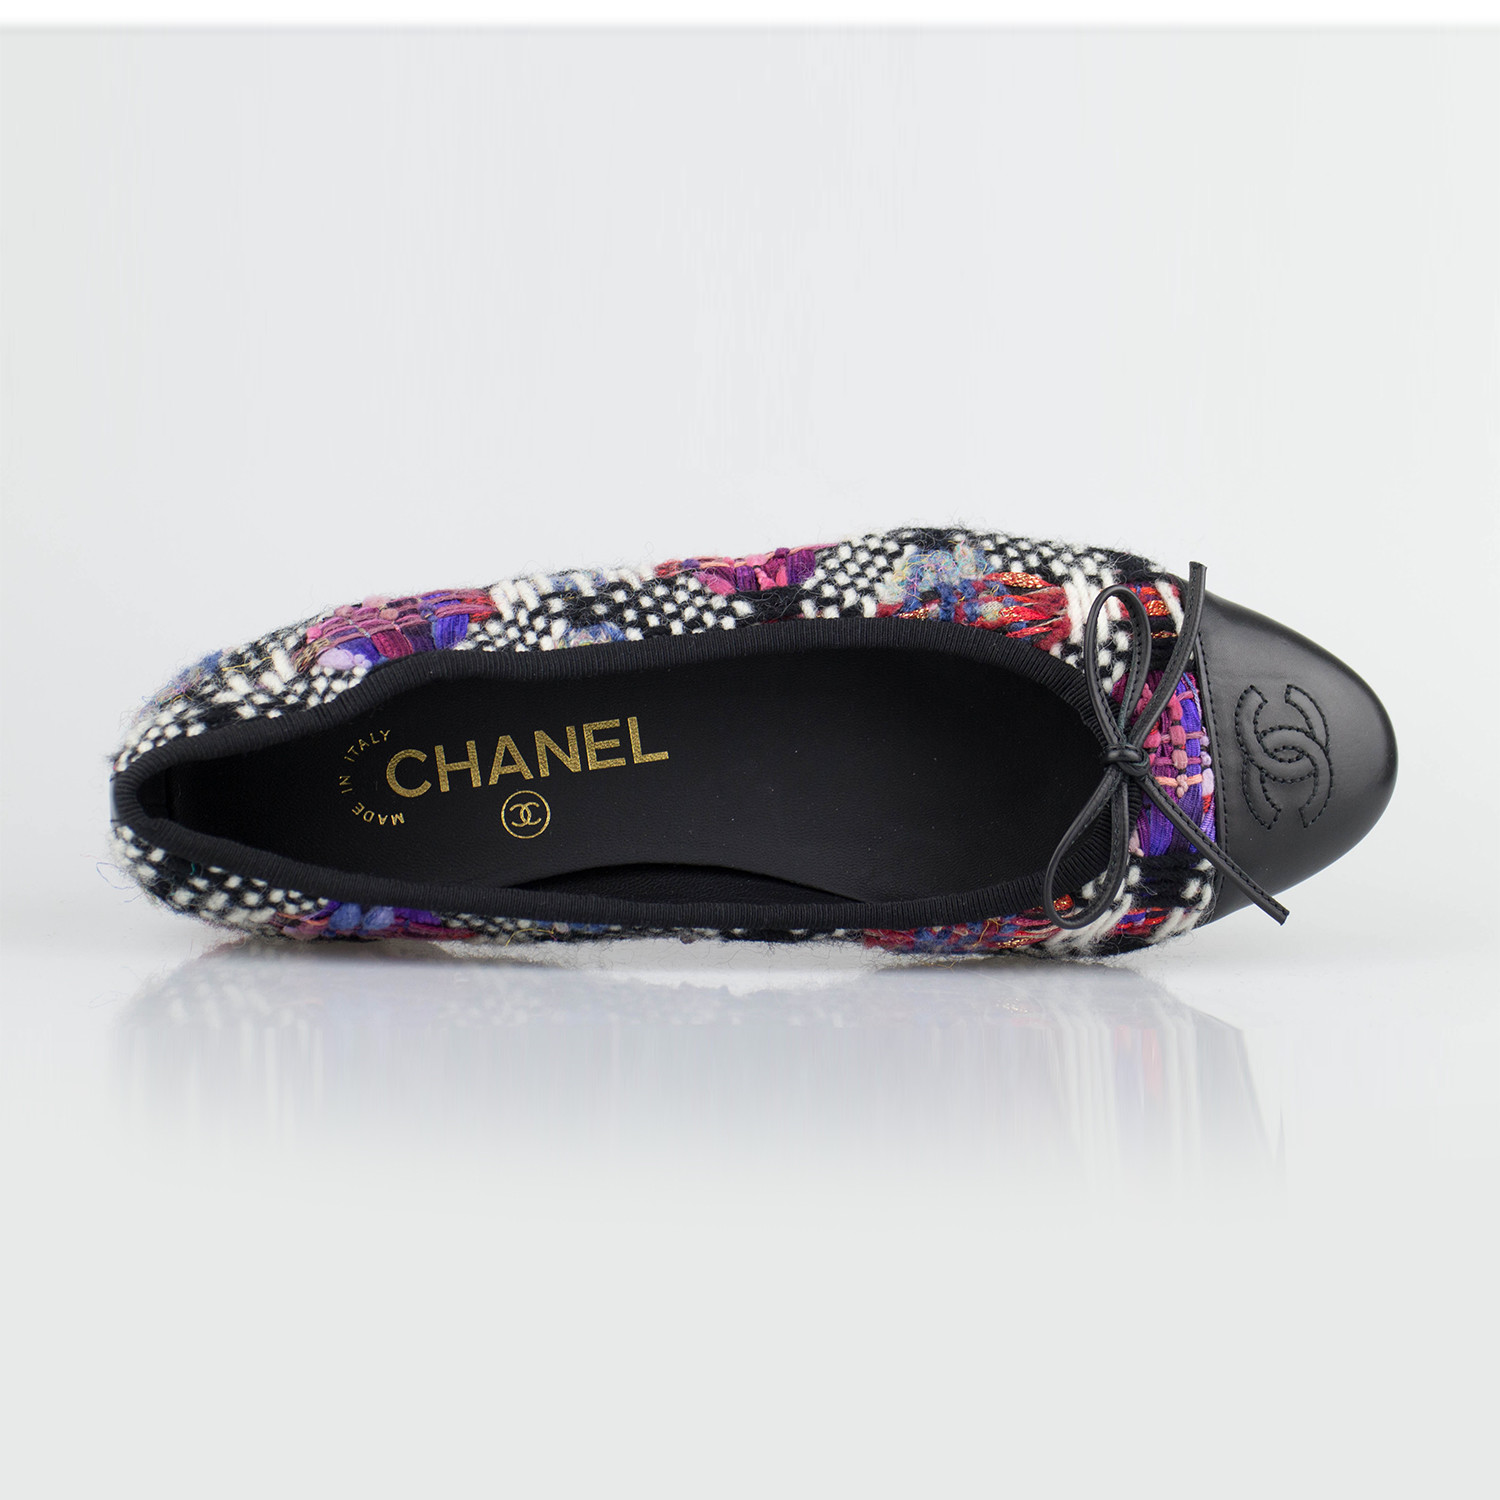 CHANEL, Shoes, Chanel S22 Cruise Collection Ballerina Flats